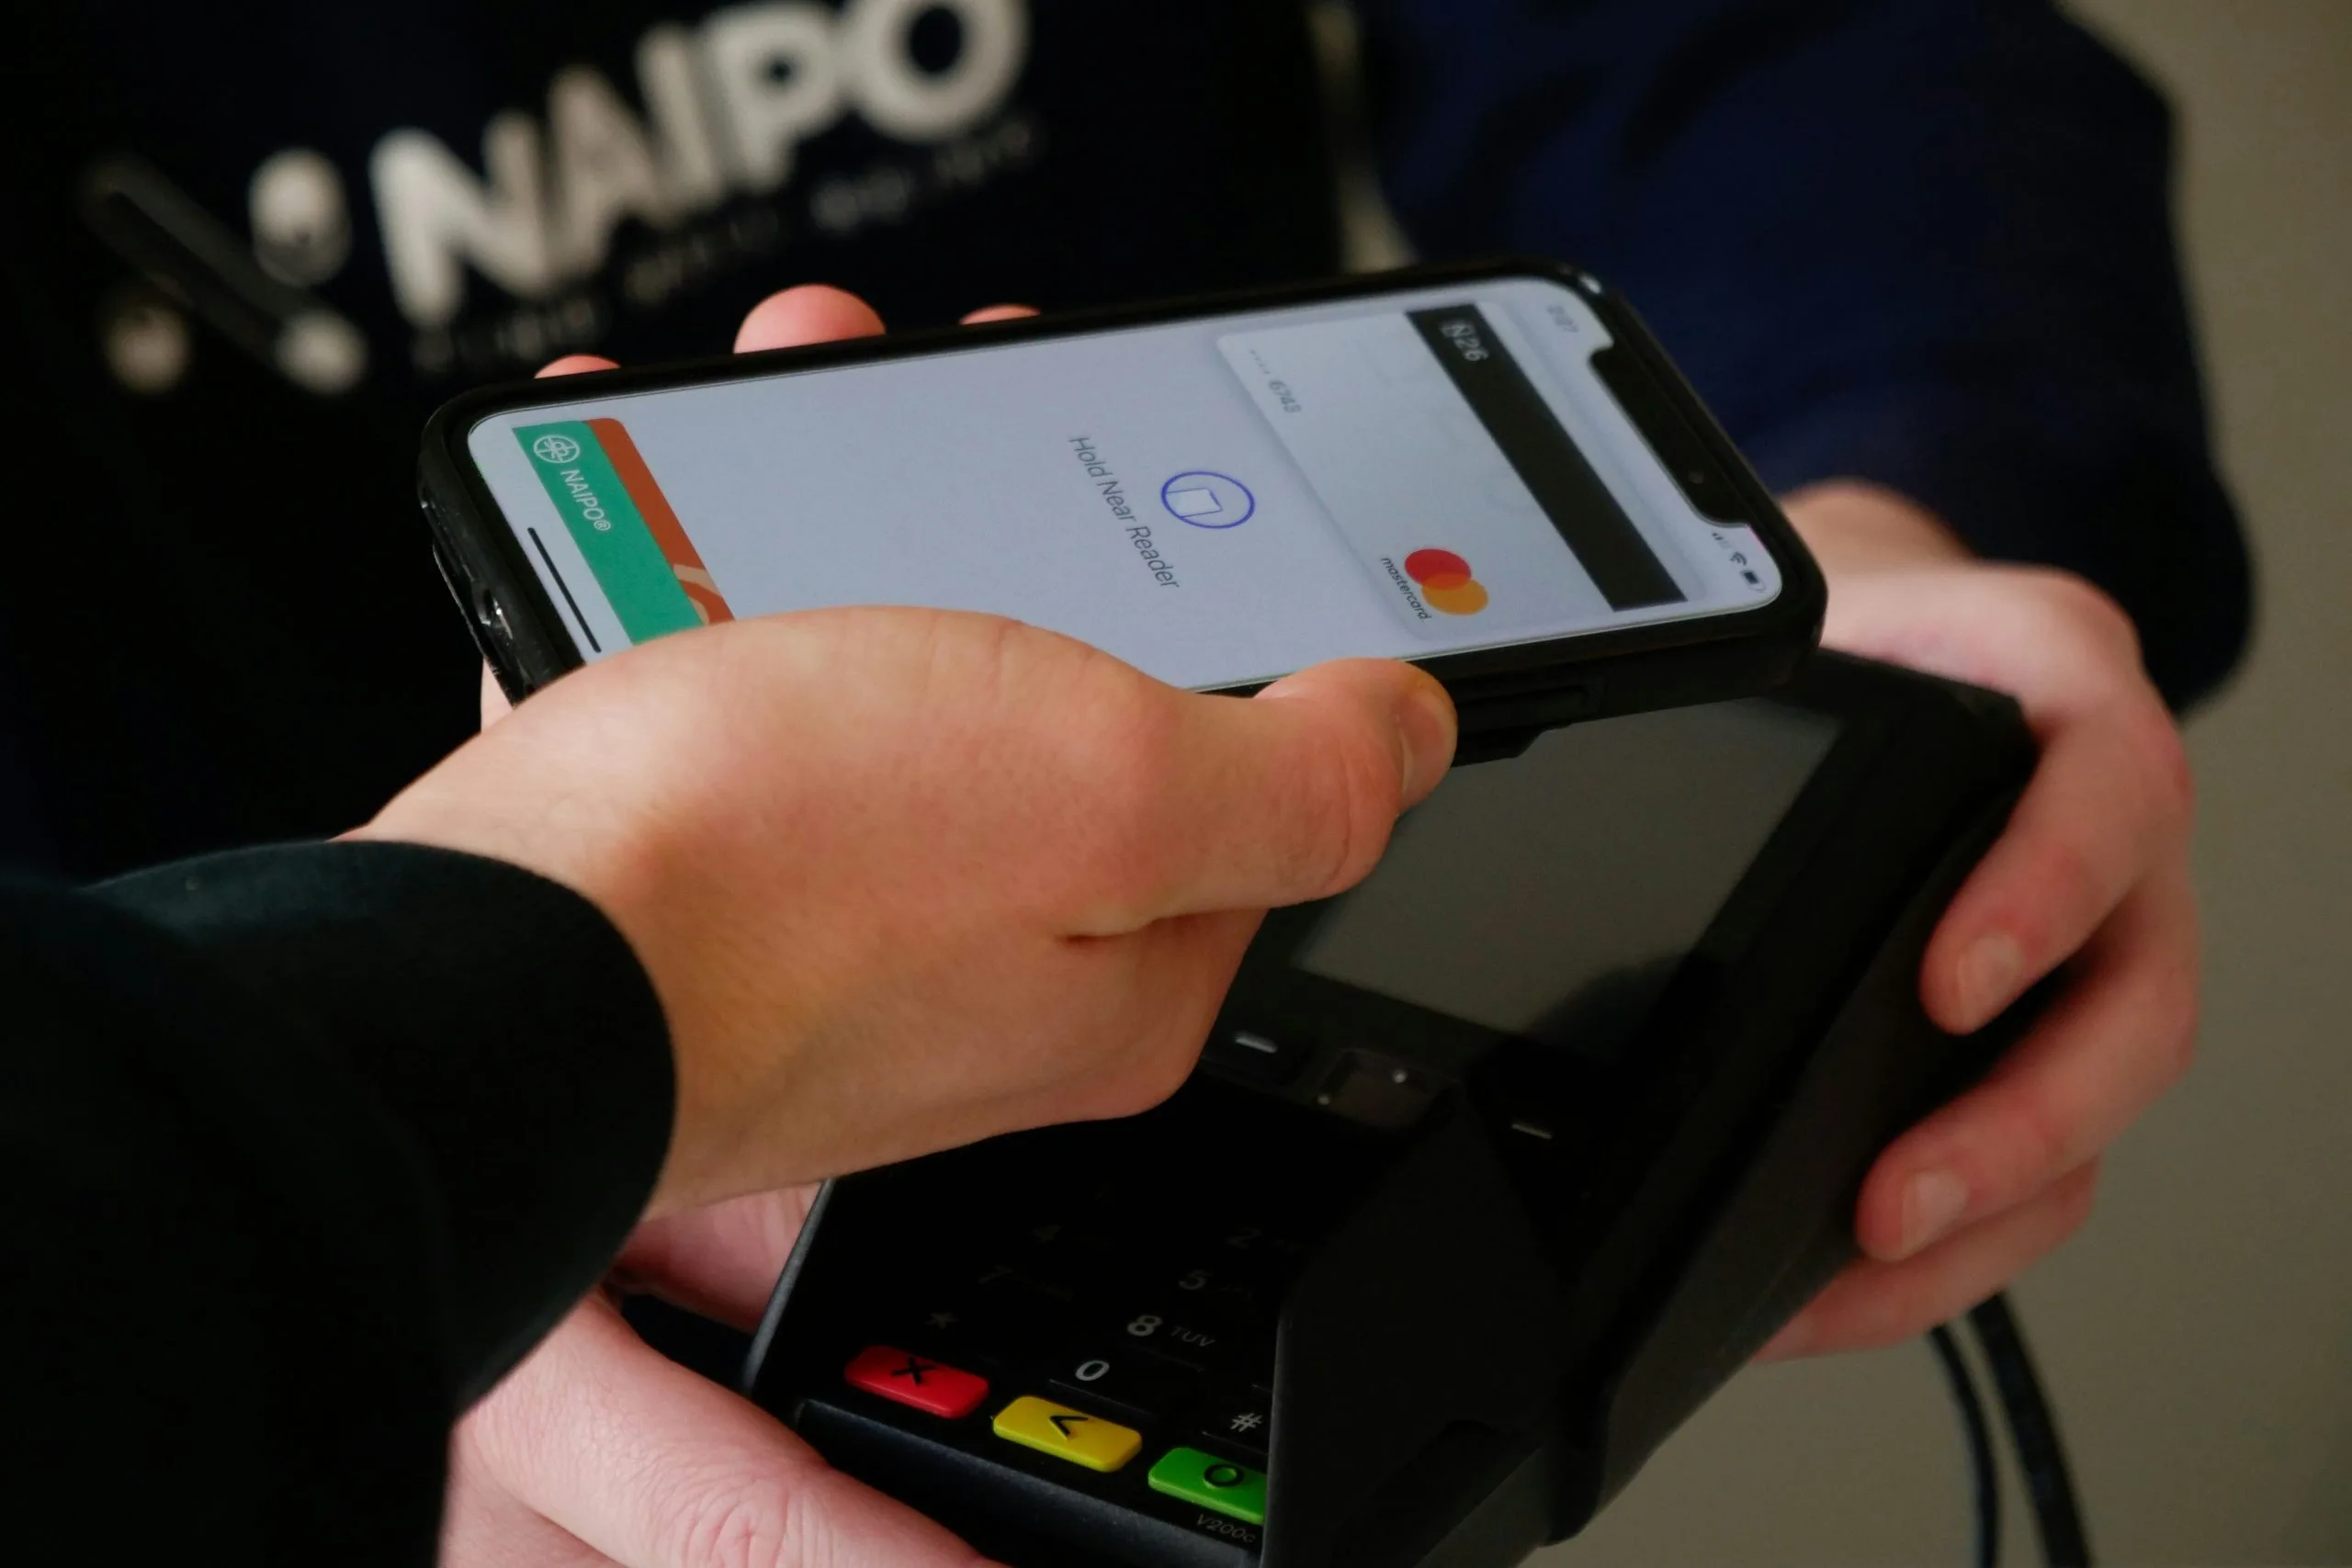 Payments with cards